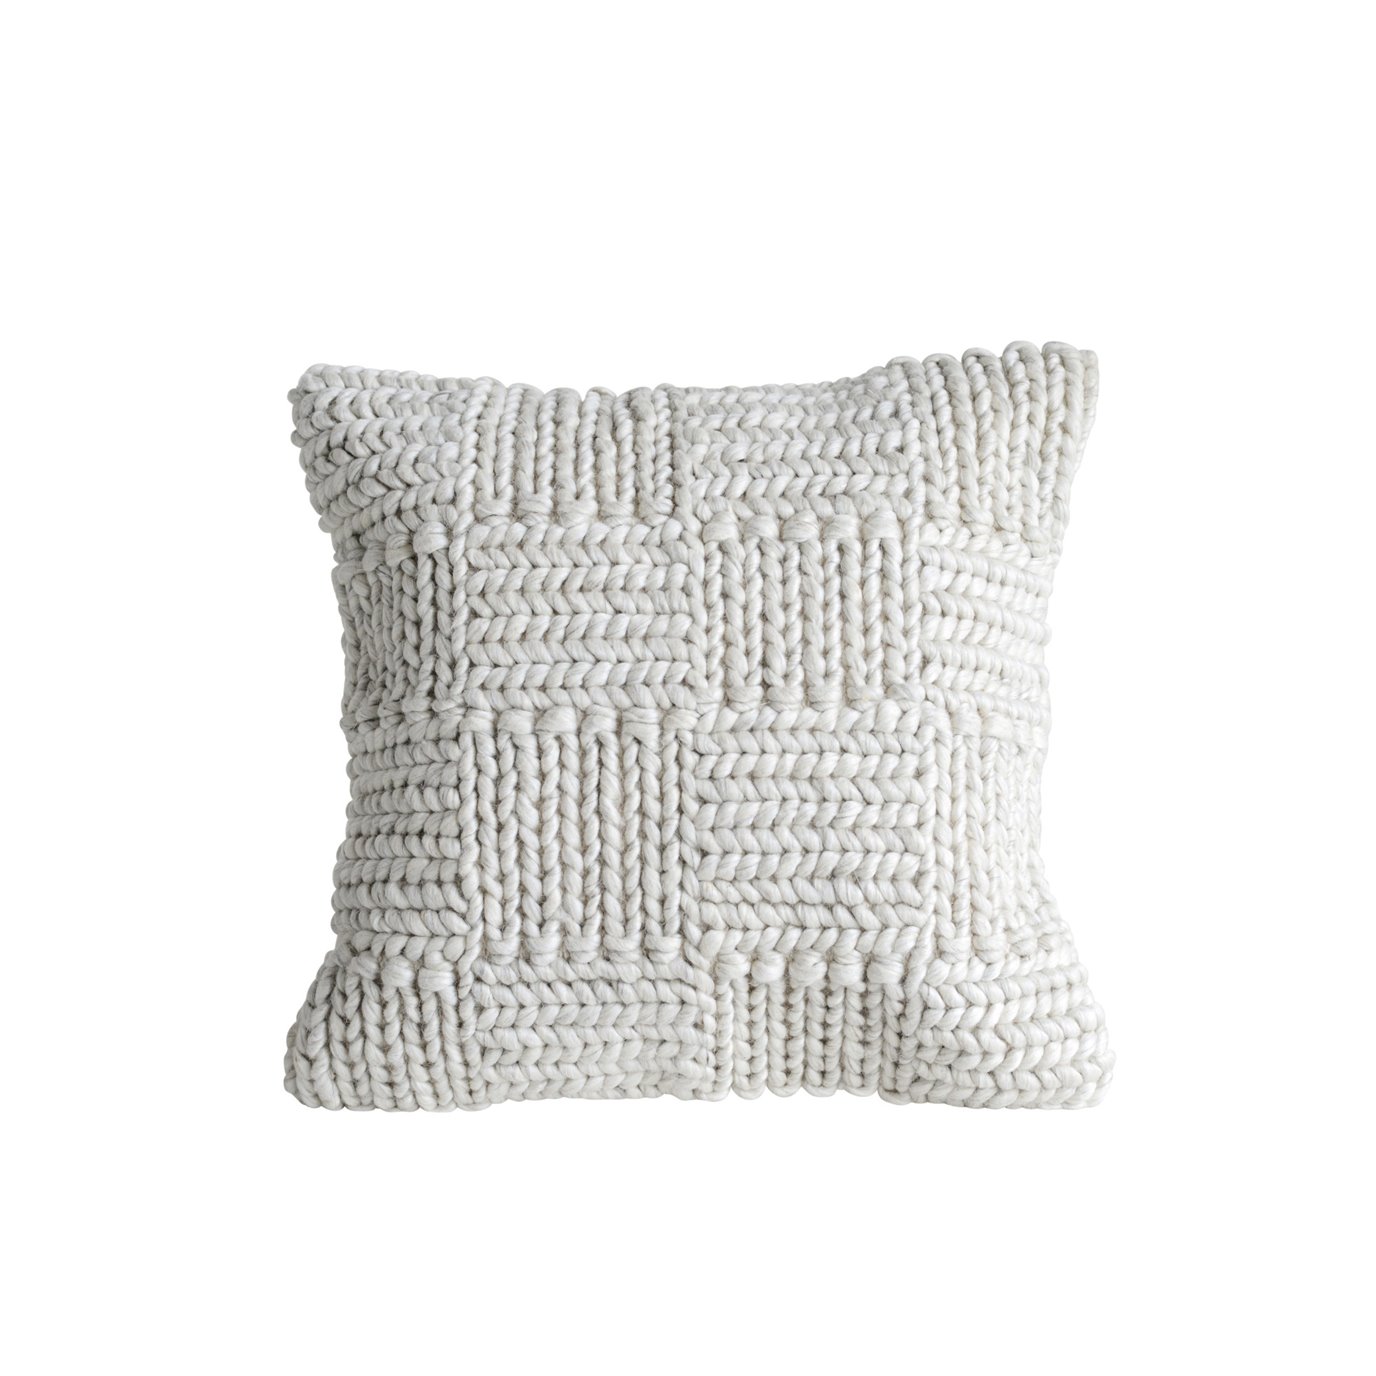 Square Wool Knit Pillow in Cream